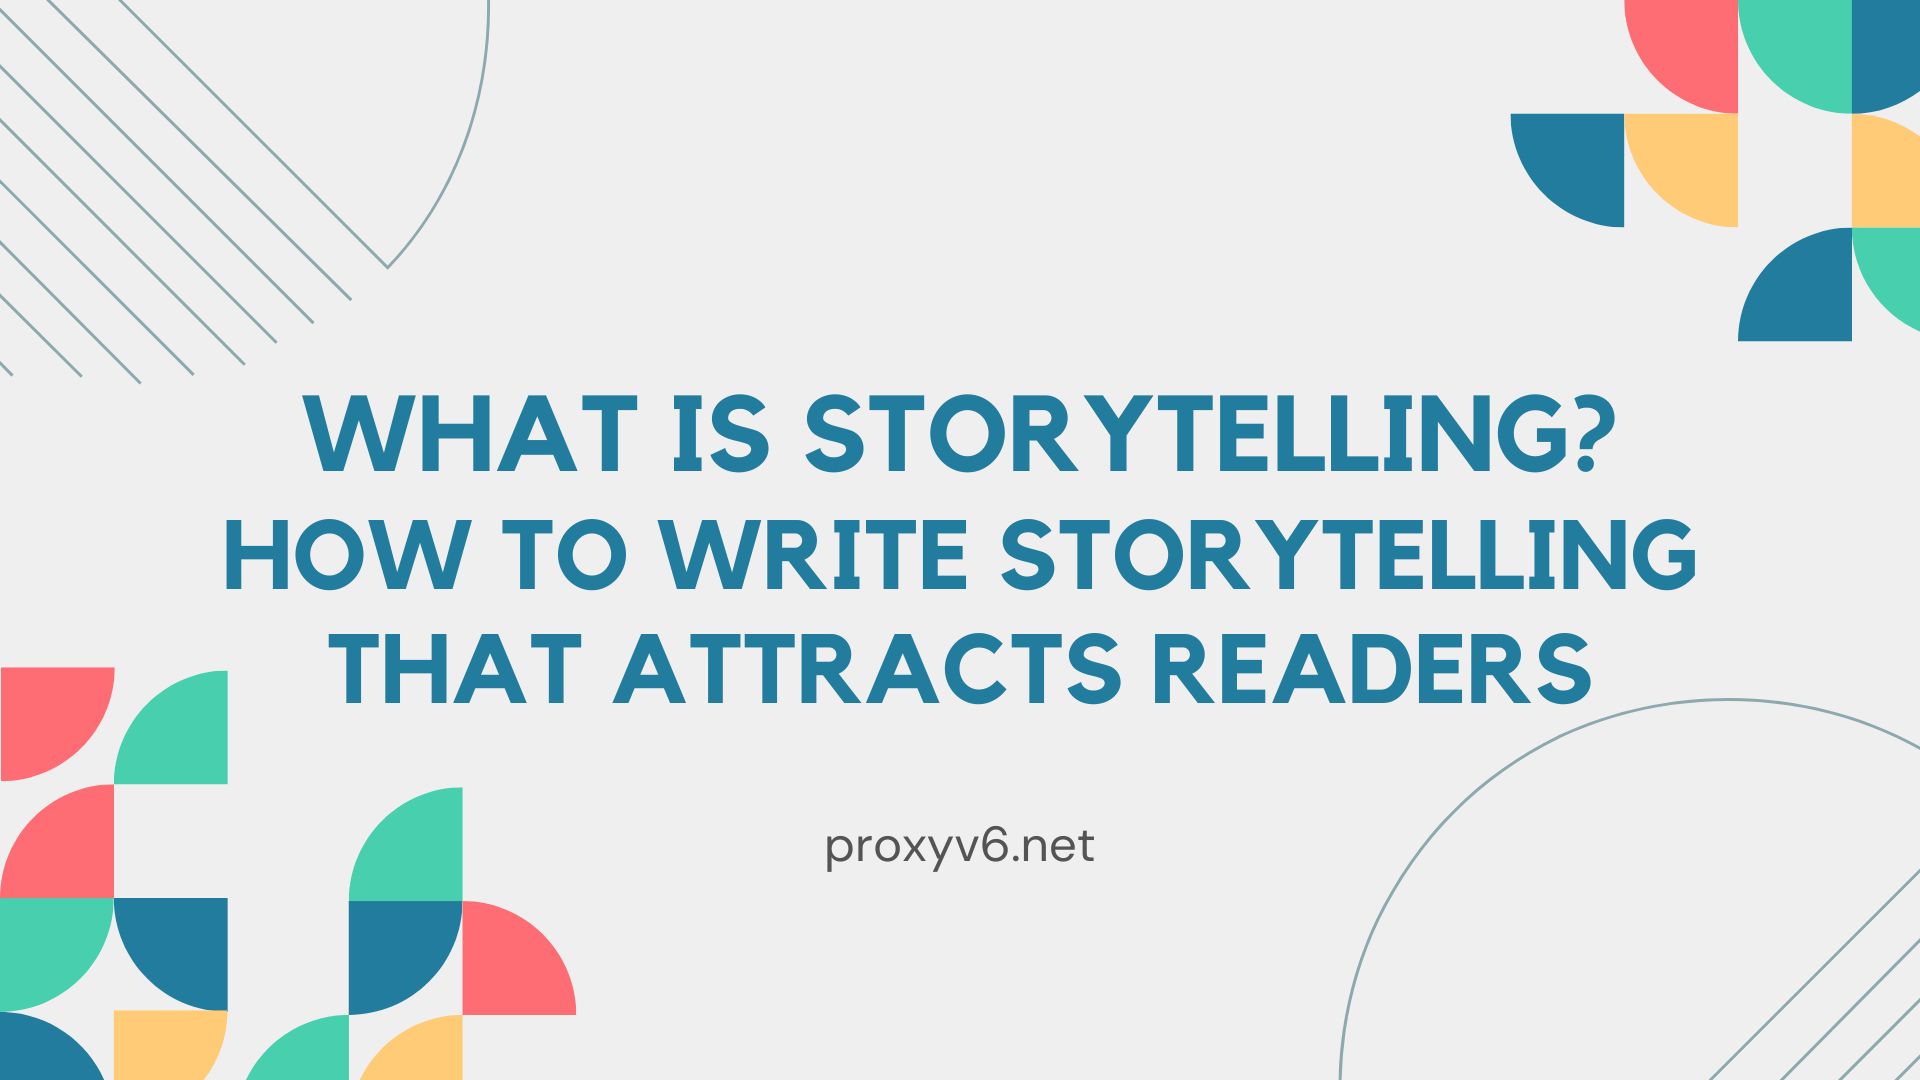 What is Storytelling? How to write storytelling that attracts readers?